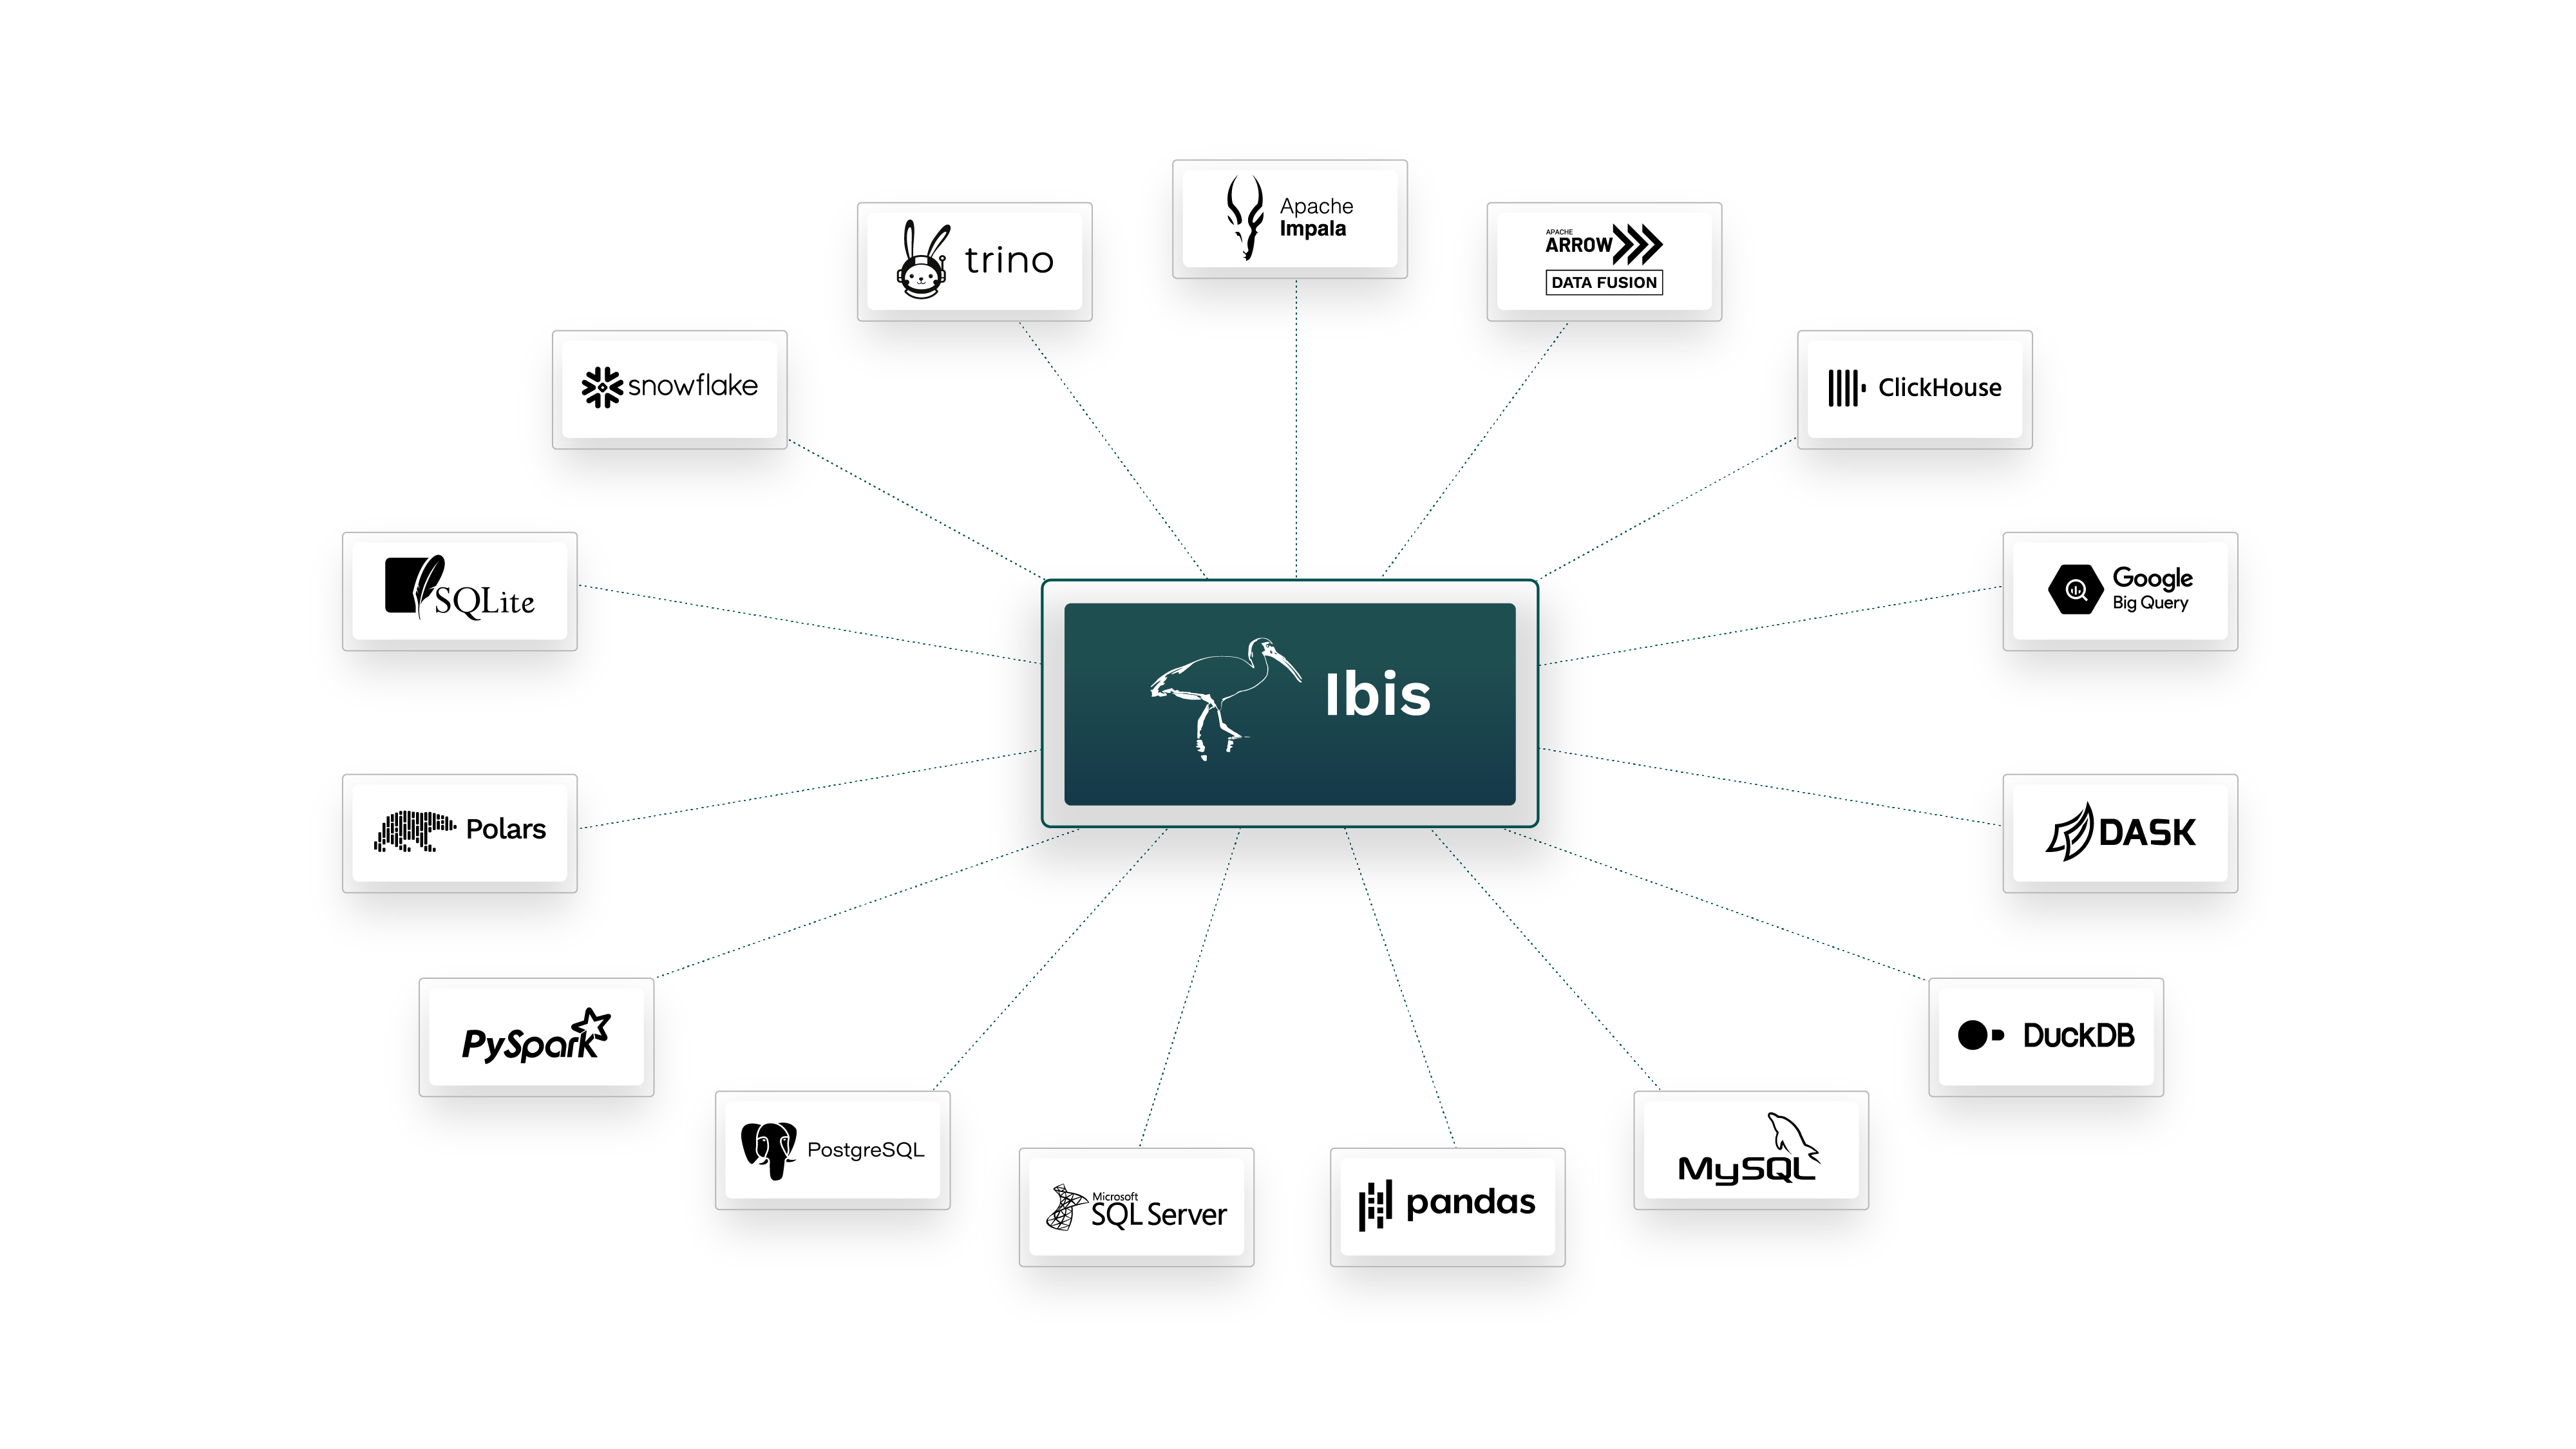 Diagram showing the backends with which Ibis interacts. Ibis is in the center and connects with 15 different backends on the periphery including among others DuckDB, Impala, Snowflake, SQLite, Polars